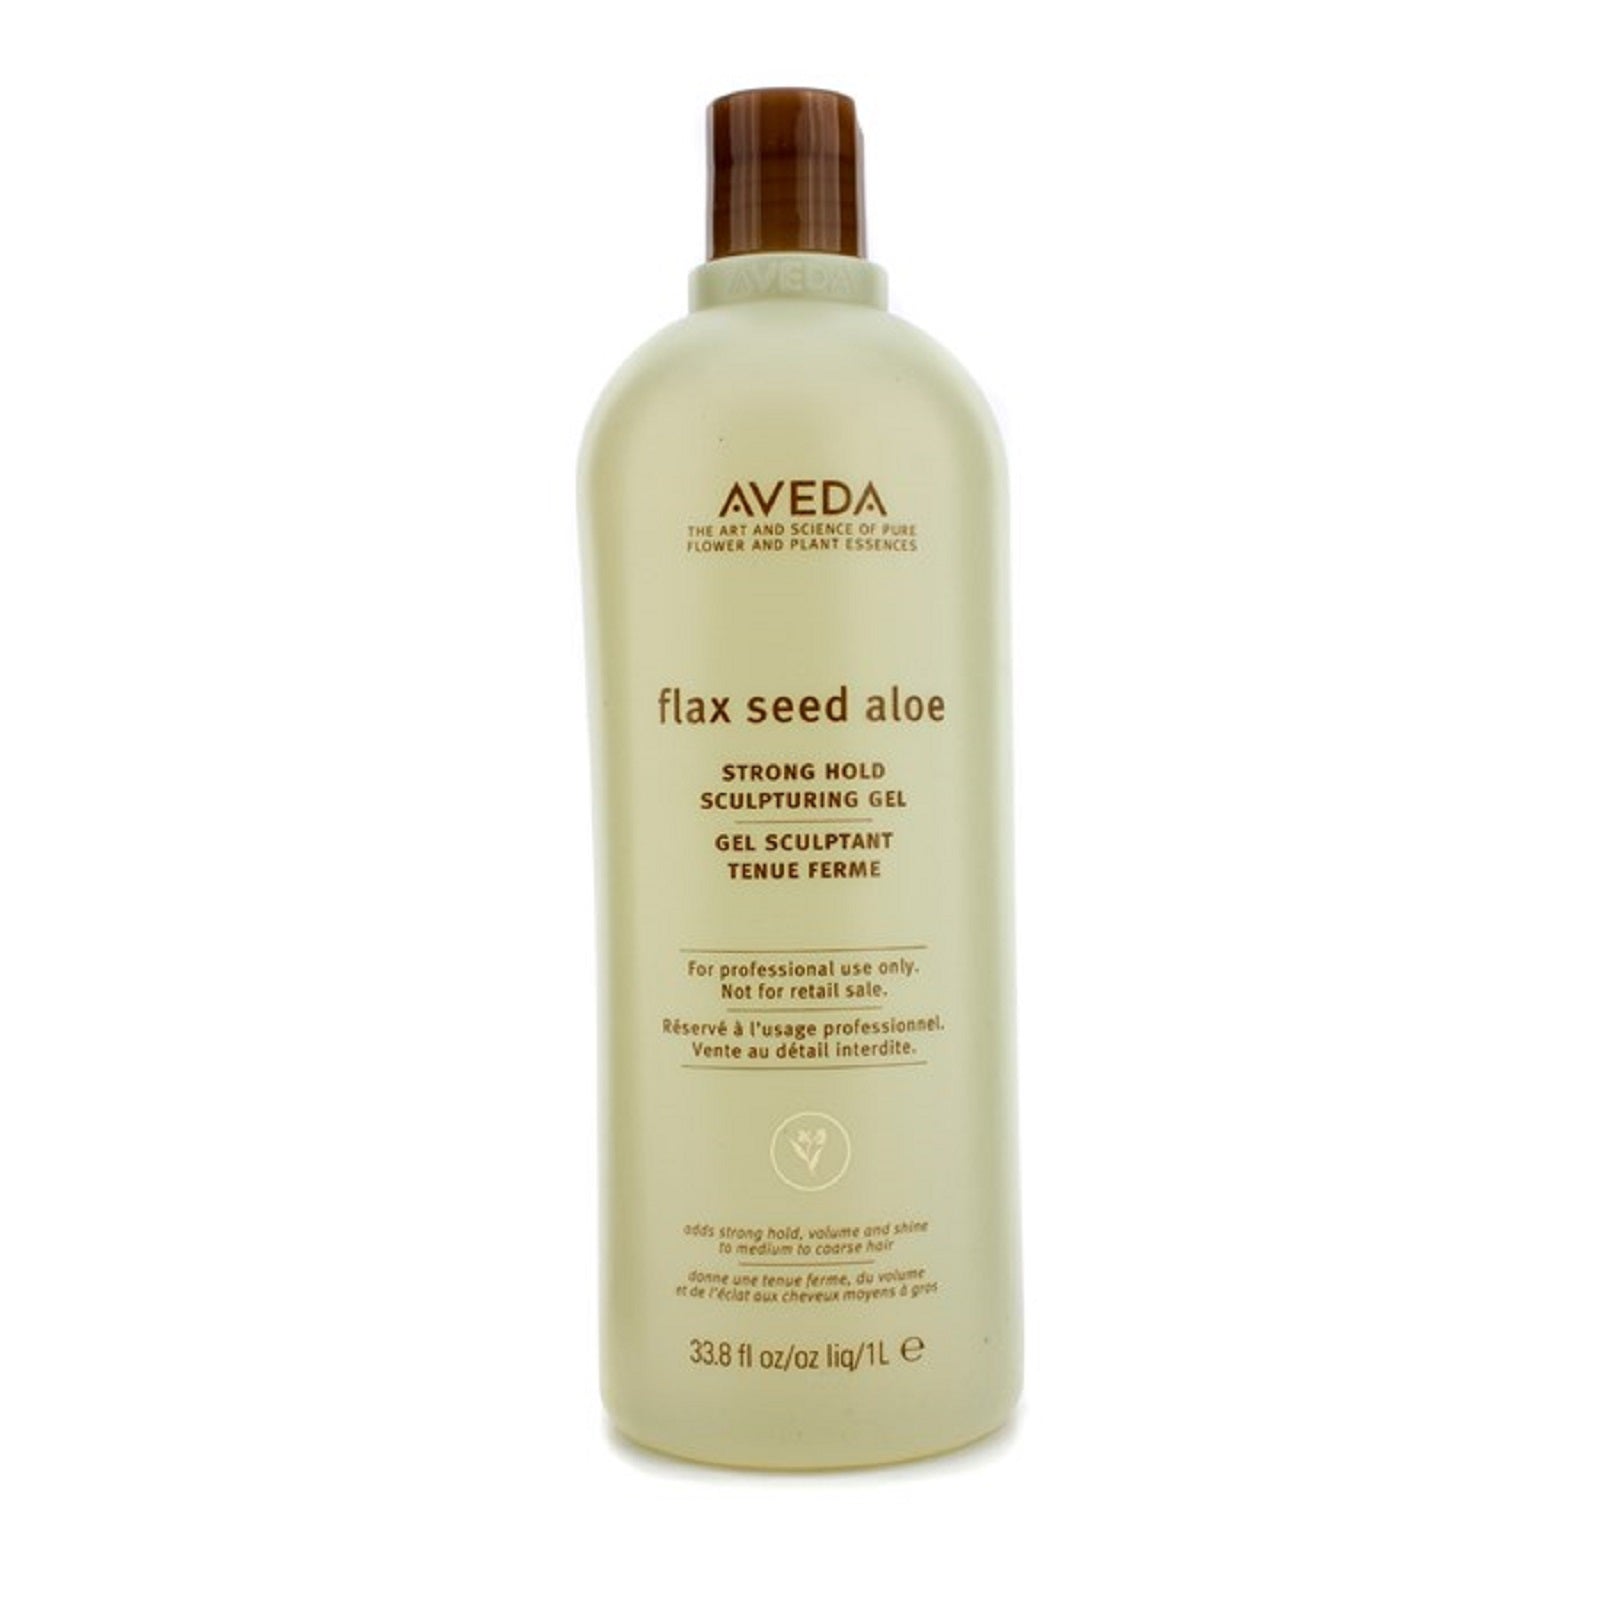 AVEDA Flax Seed Aloe Strong Hold Sculpturing Gel Liter 33.8oz